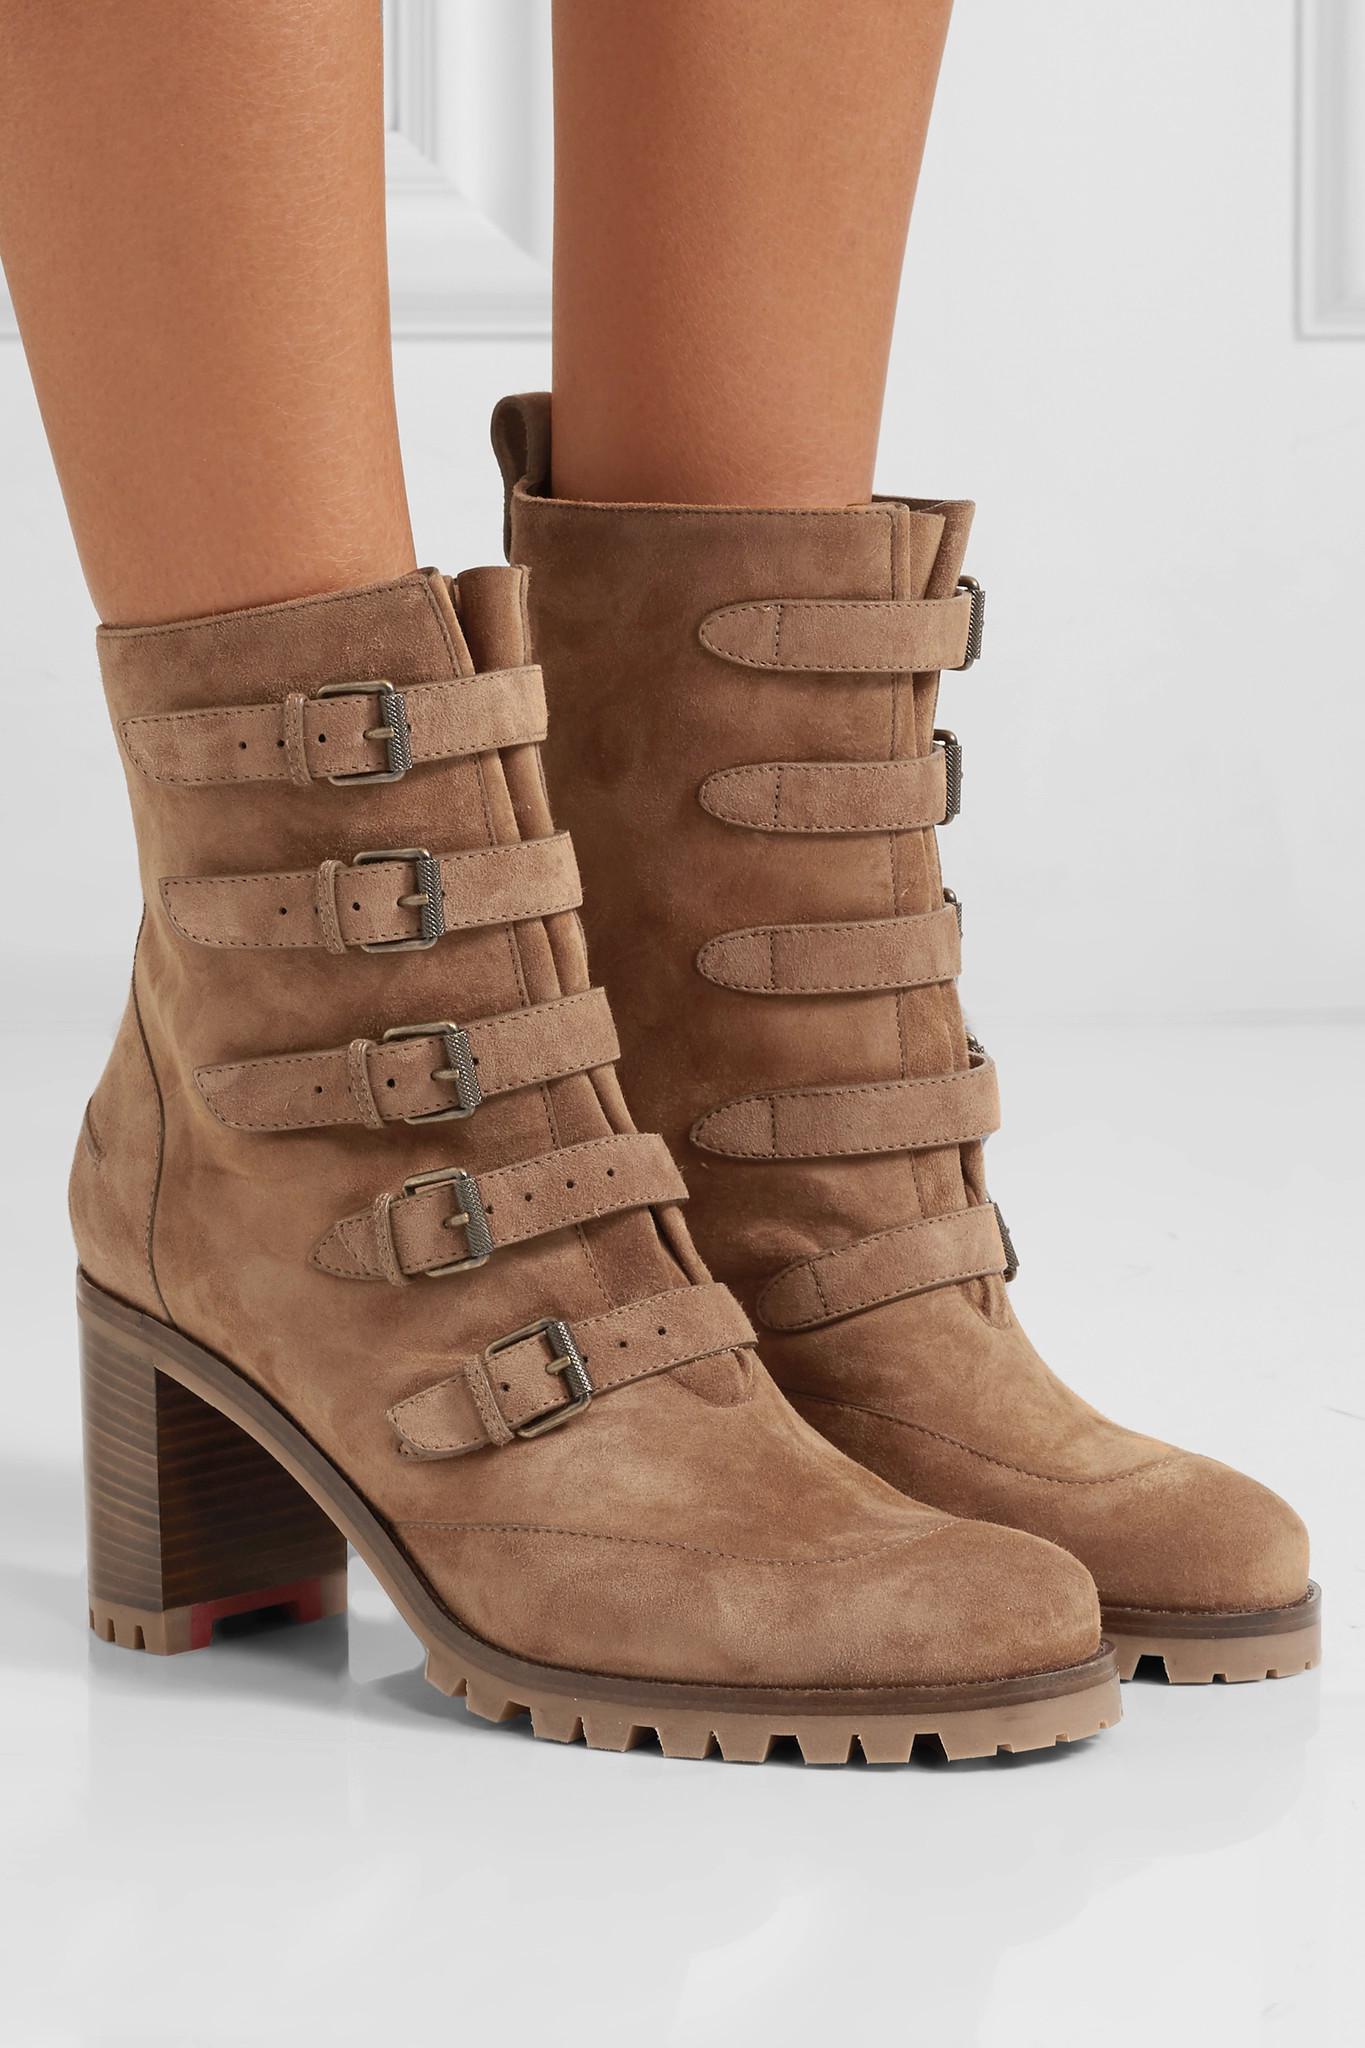 Christian Louboutin Who Walks Buckled Suede Ankle Boots in Brown - Lyst